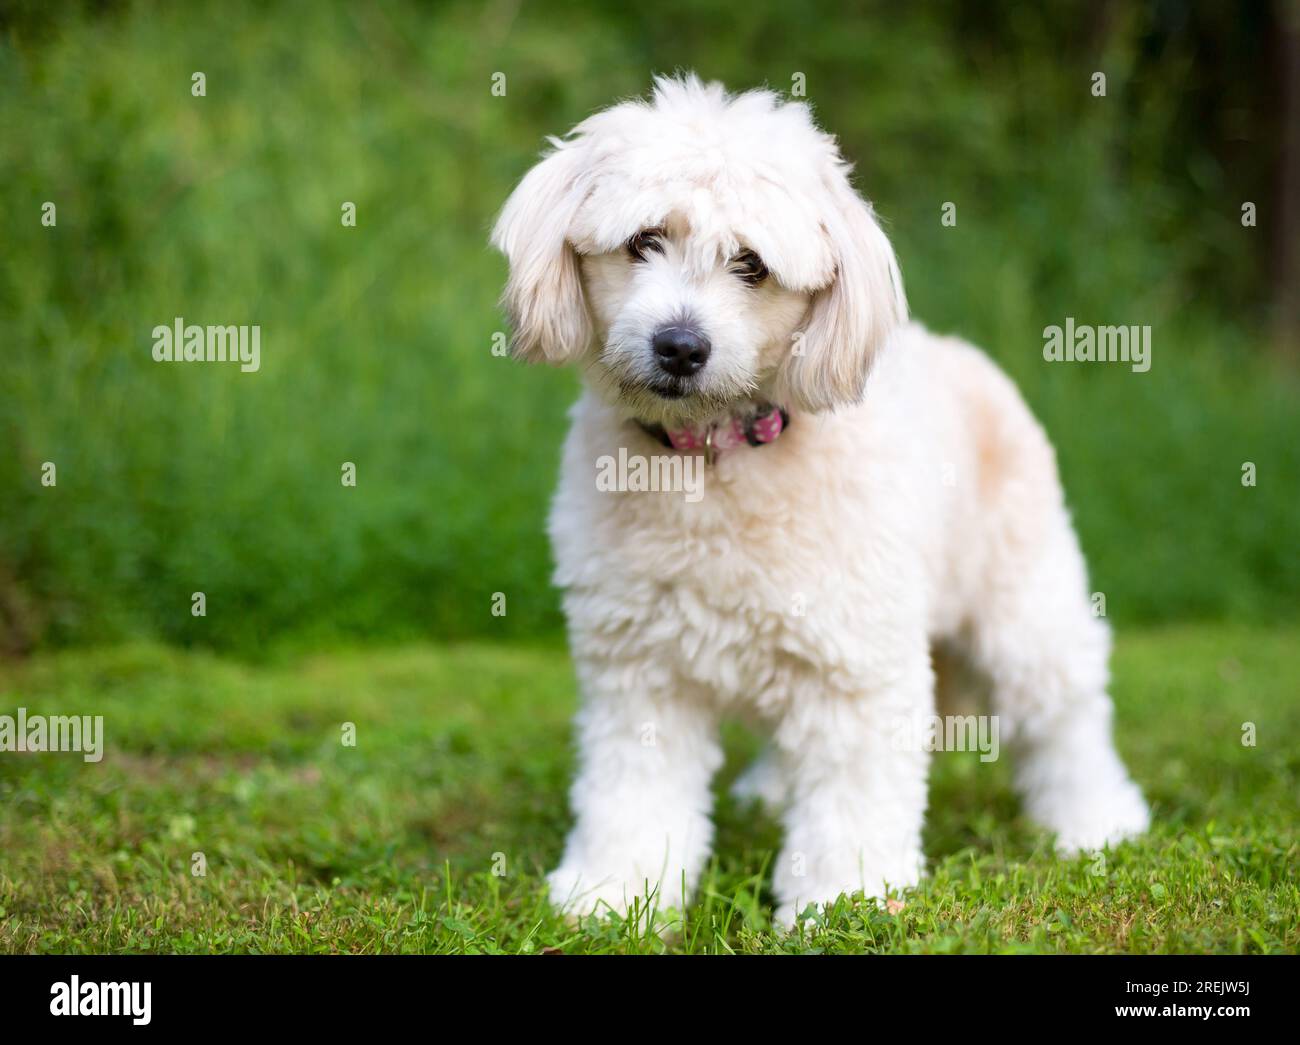 A cute Pomeranian x Poodle mixed breed dog looking at the camera with a head tilt Stock Photo